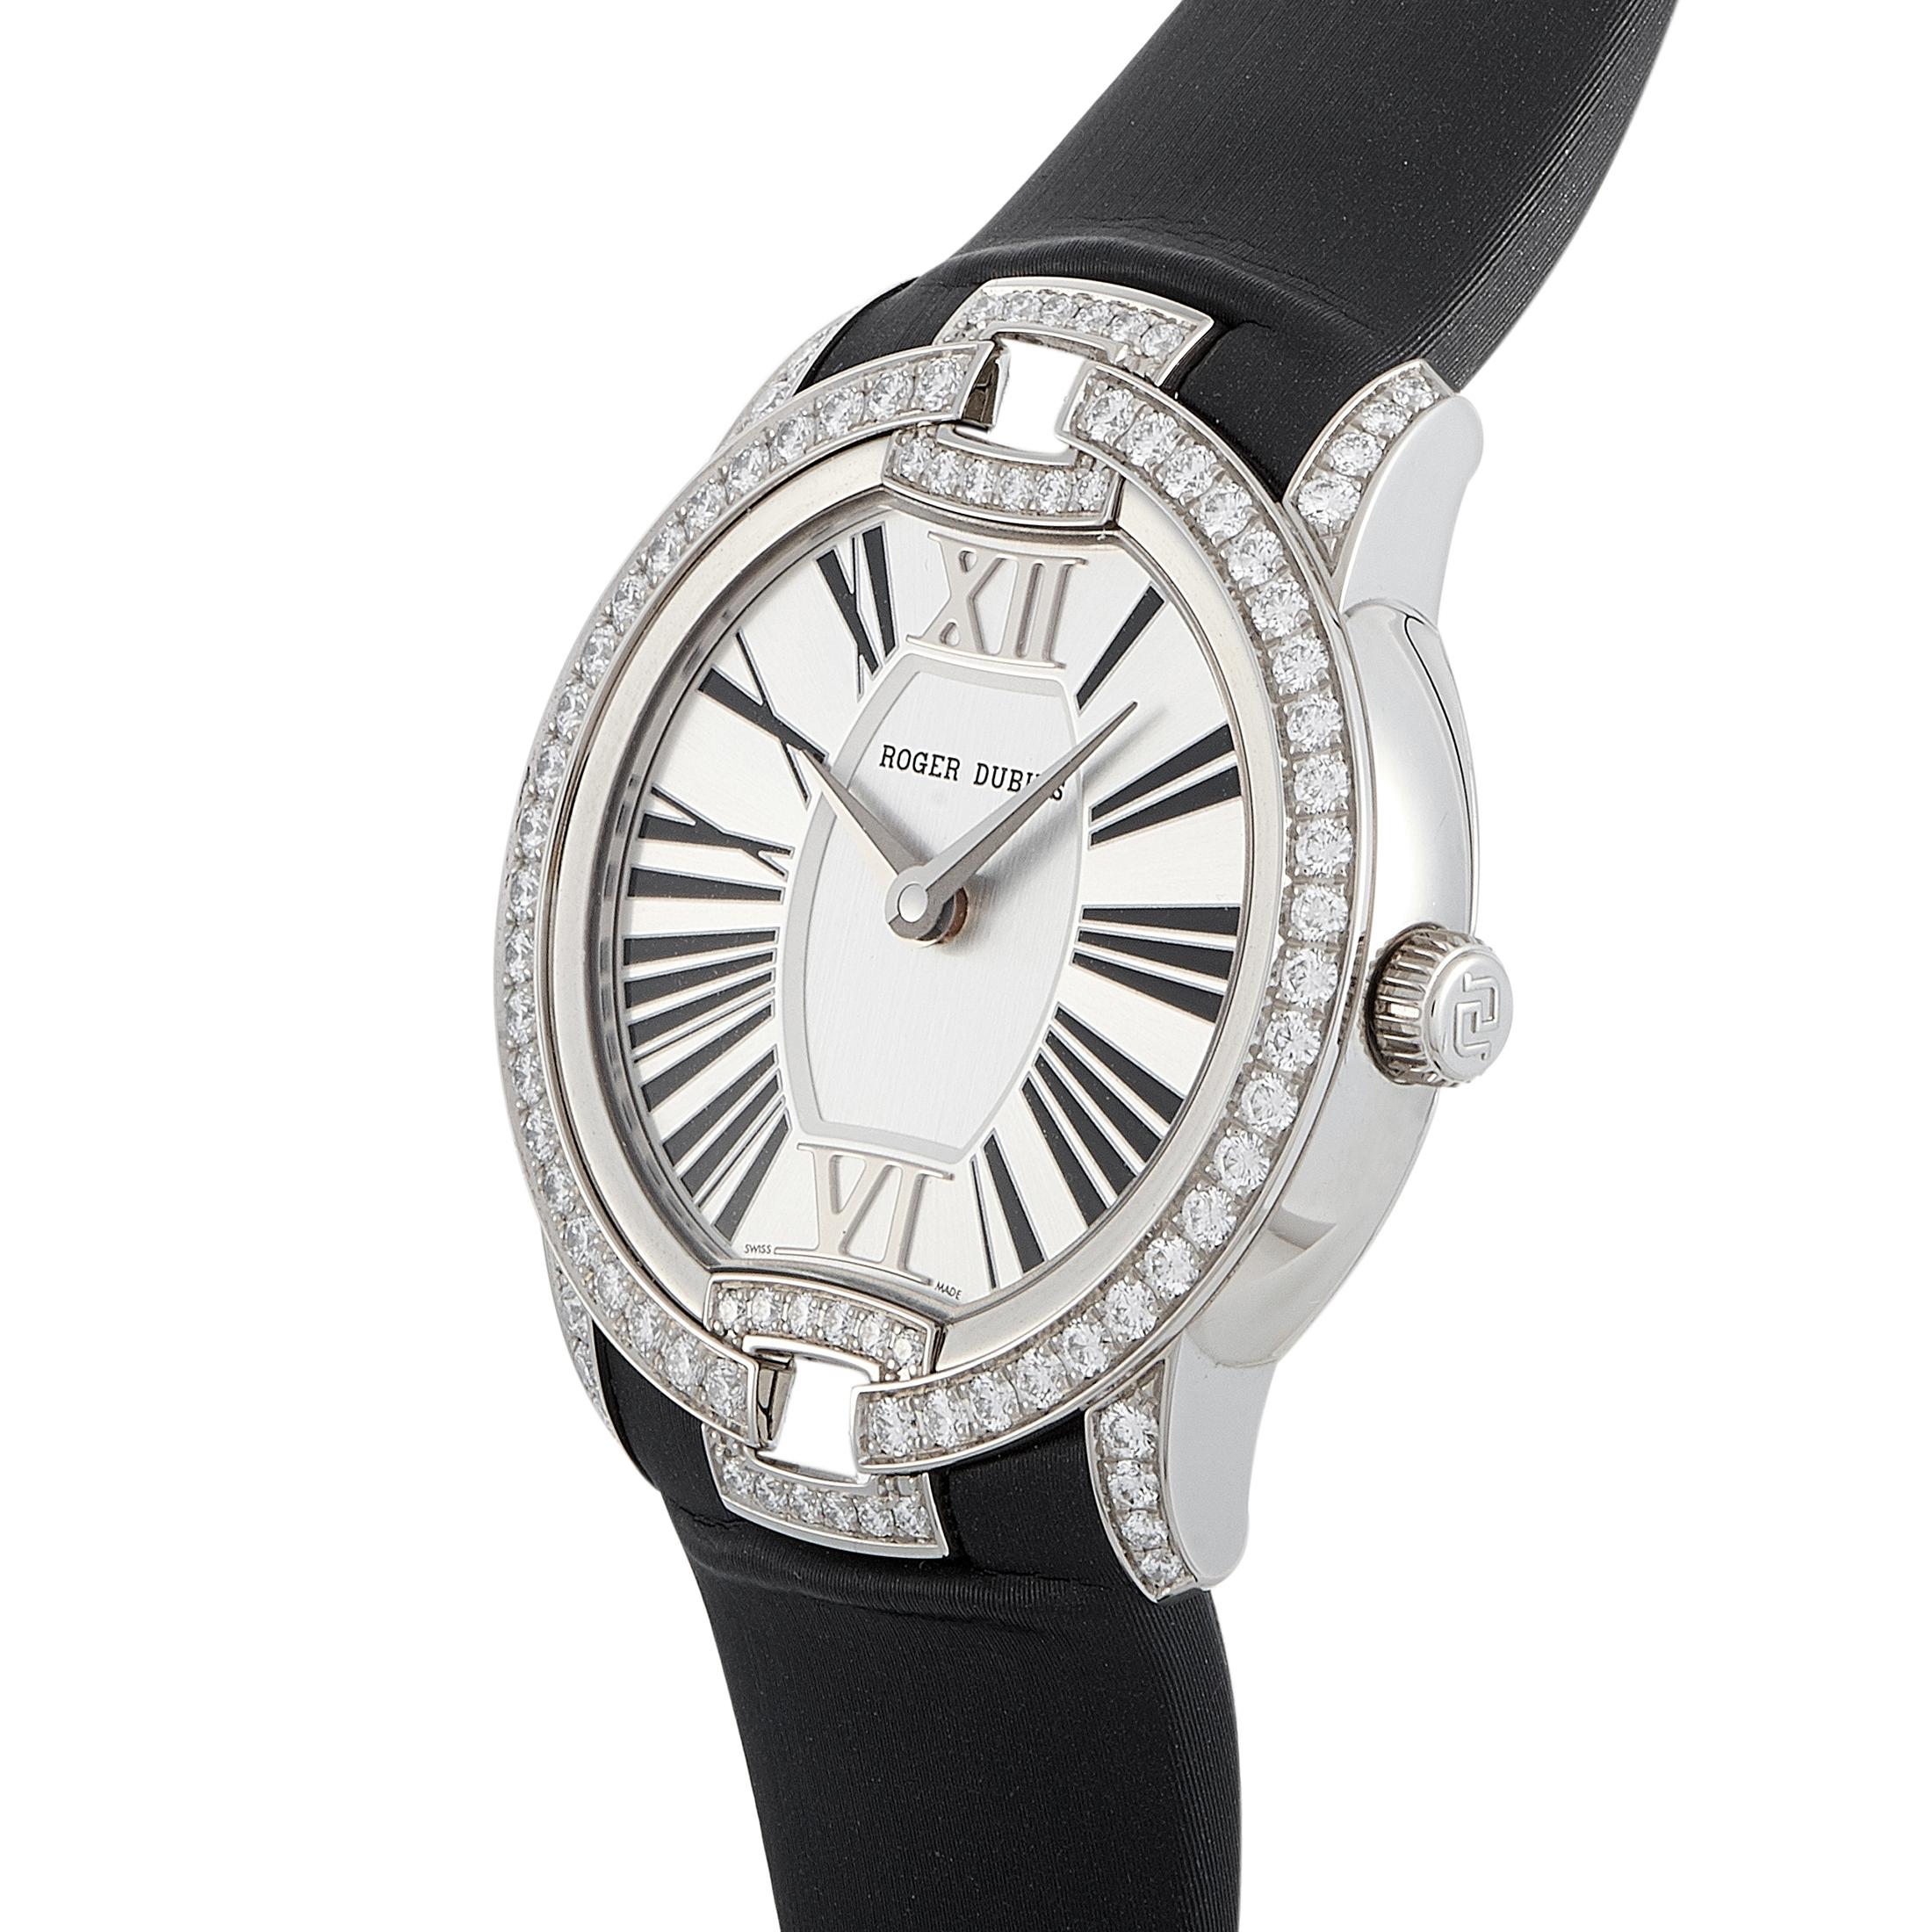 The Roger Dubuis Velvet watch, reference number RDDBVE0007, is a member of the sublime “Velvet” collection.

This model is presented with a 36 mm 18K white gold case that boasts see-through back. The bezel and the lugs are set with 100 diamonds that